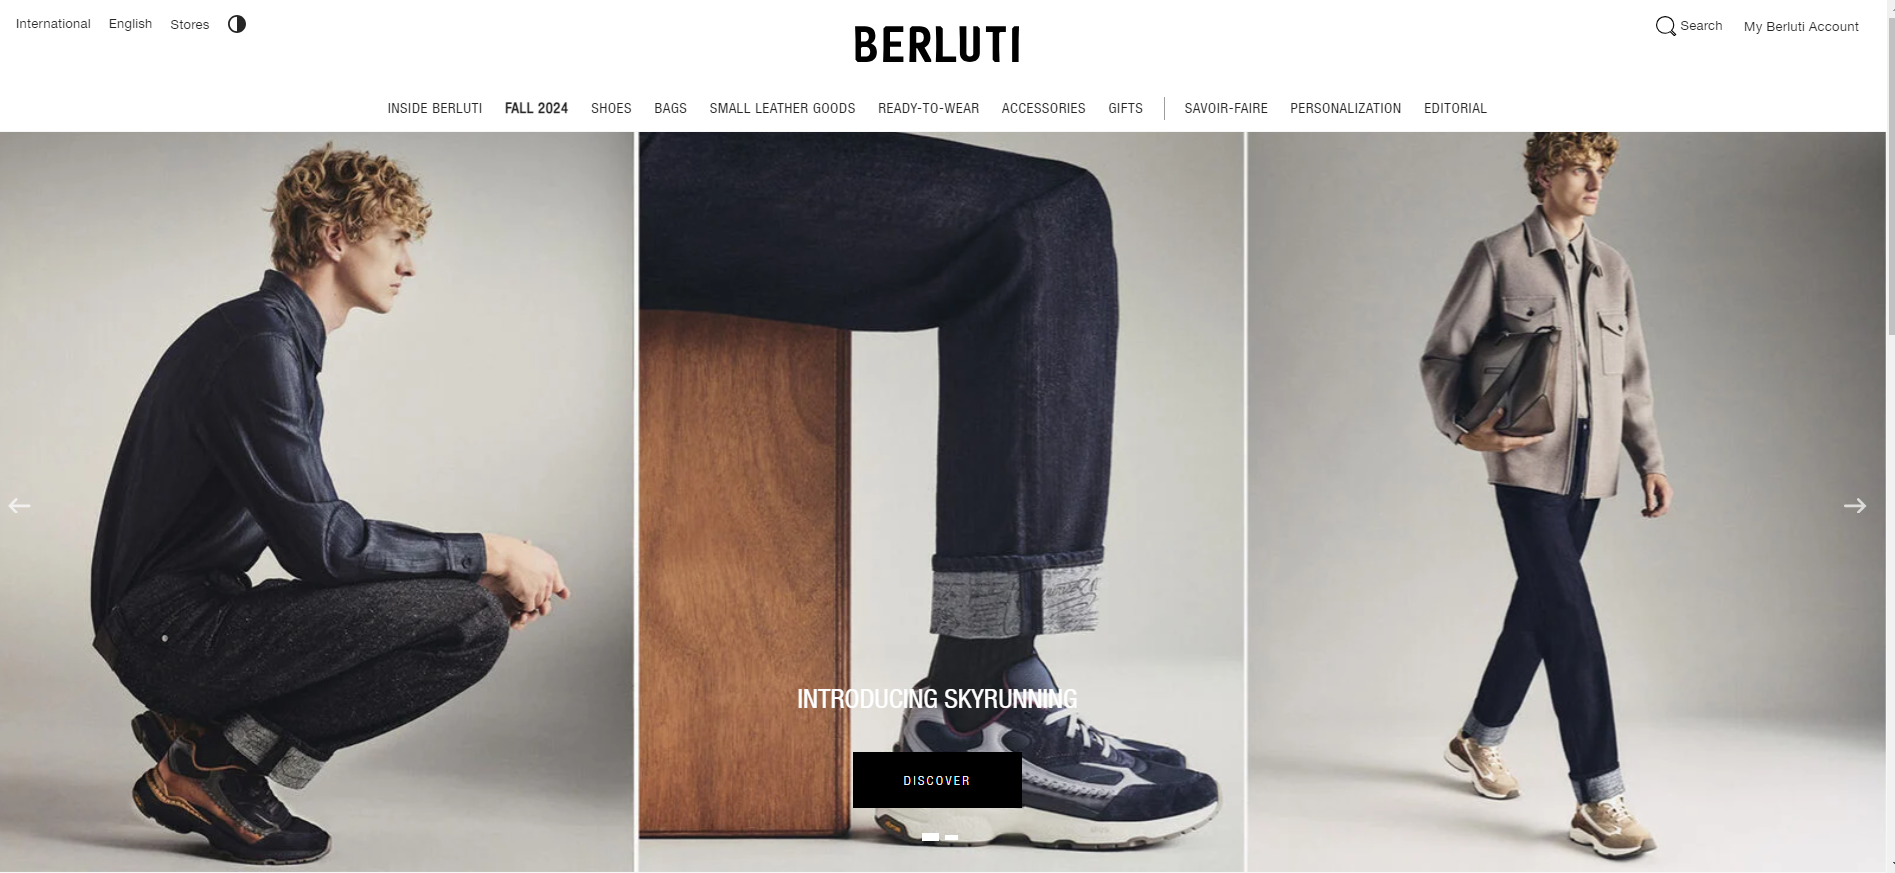 Berluti is a prestigious brand and one of the top authorized suppliers, founded in 1895 in Paris and known for its high-quality leather goods and craftsmanship. 